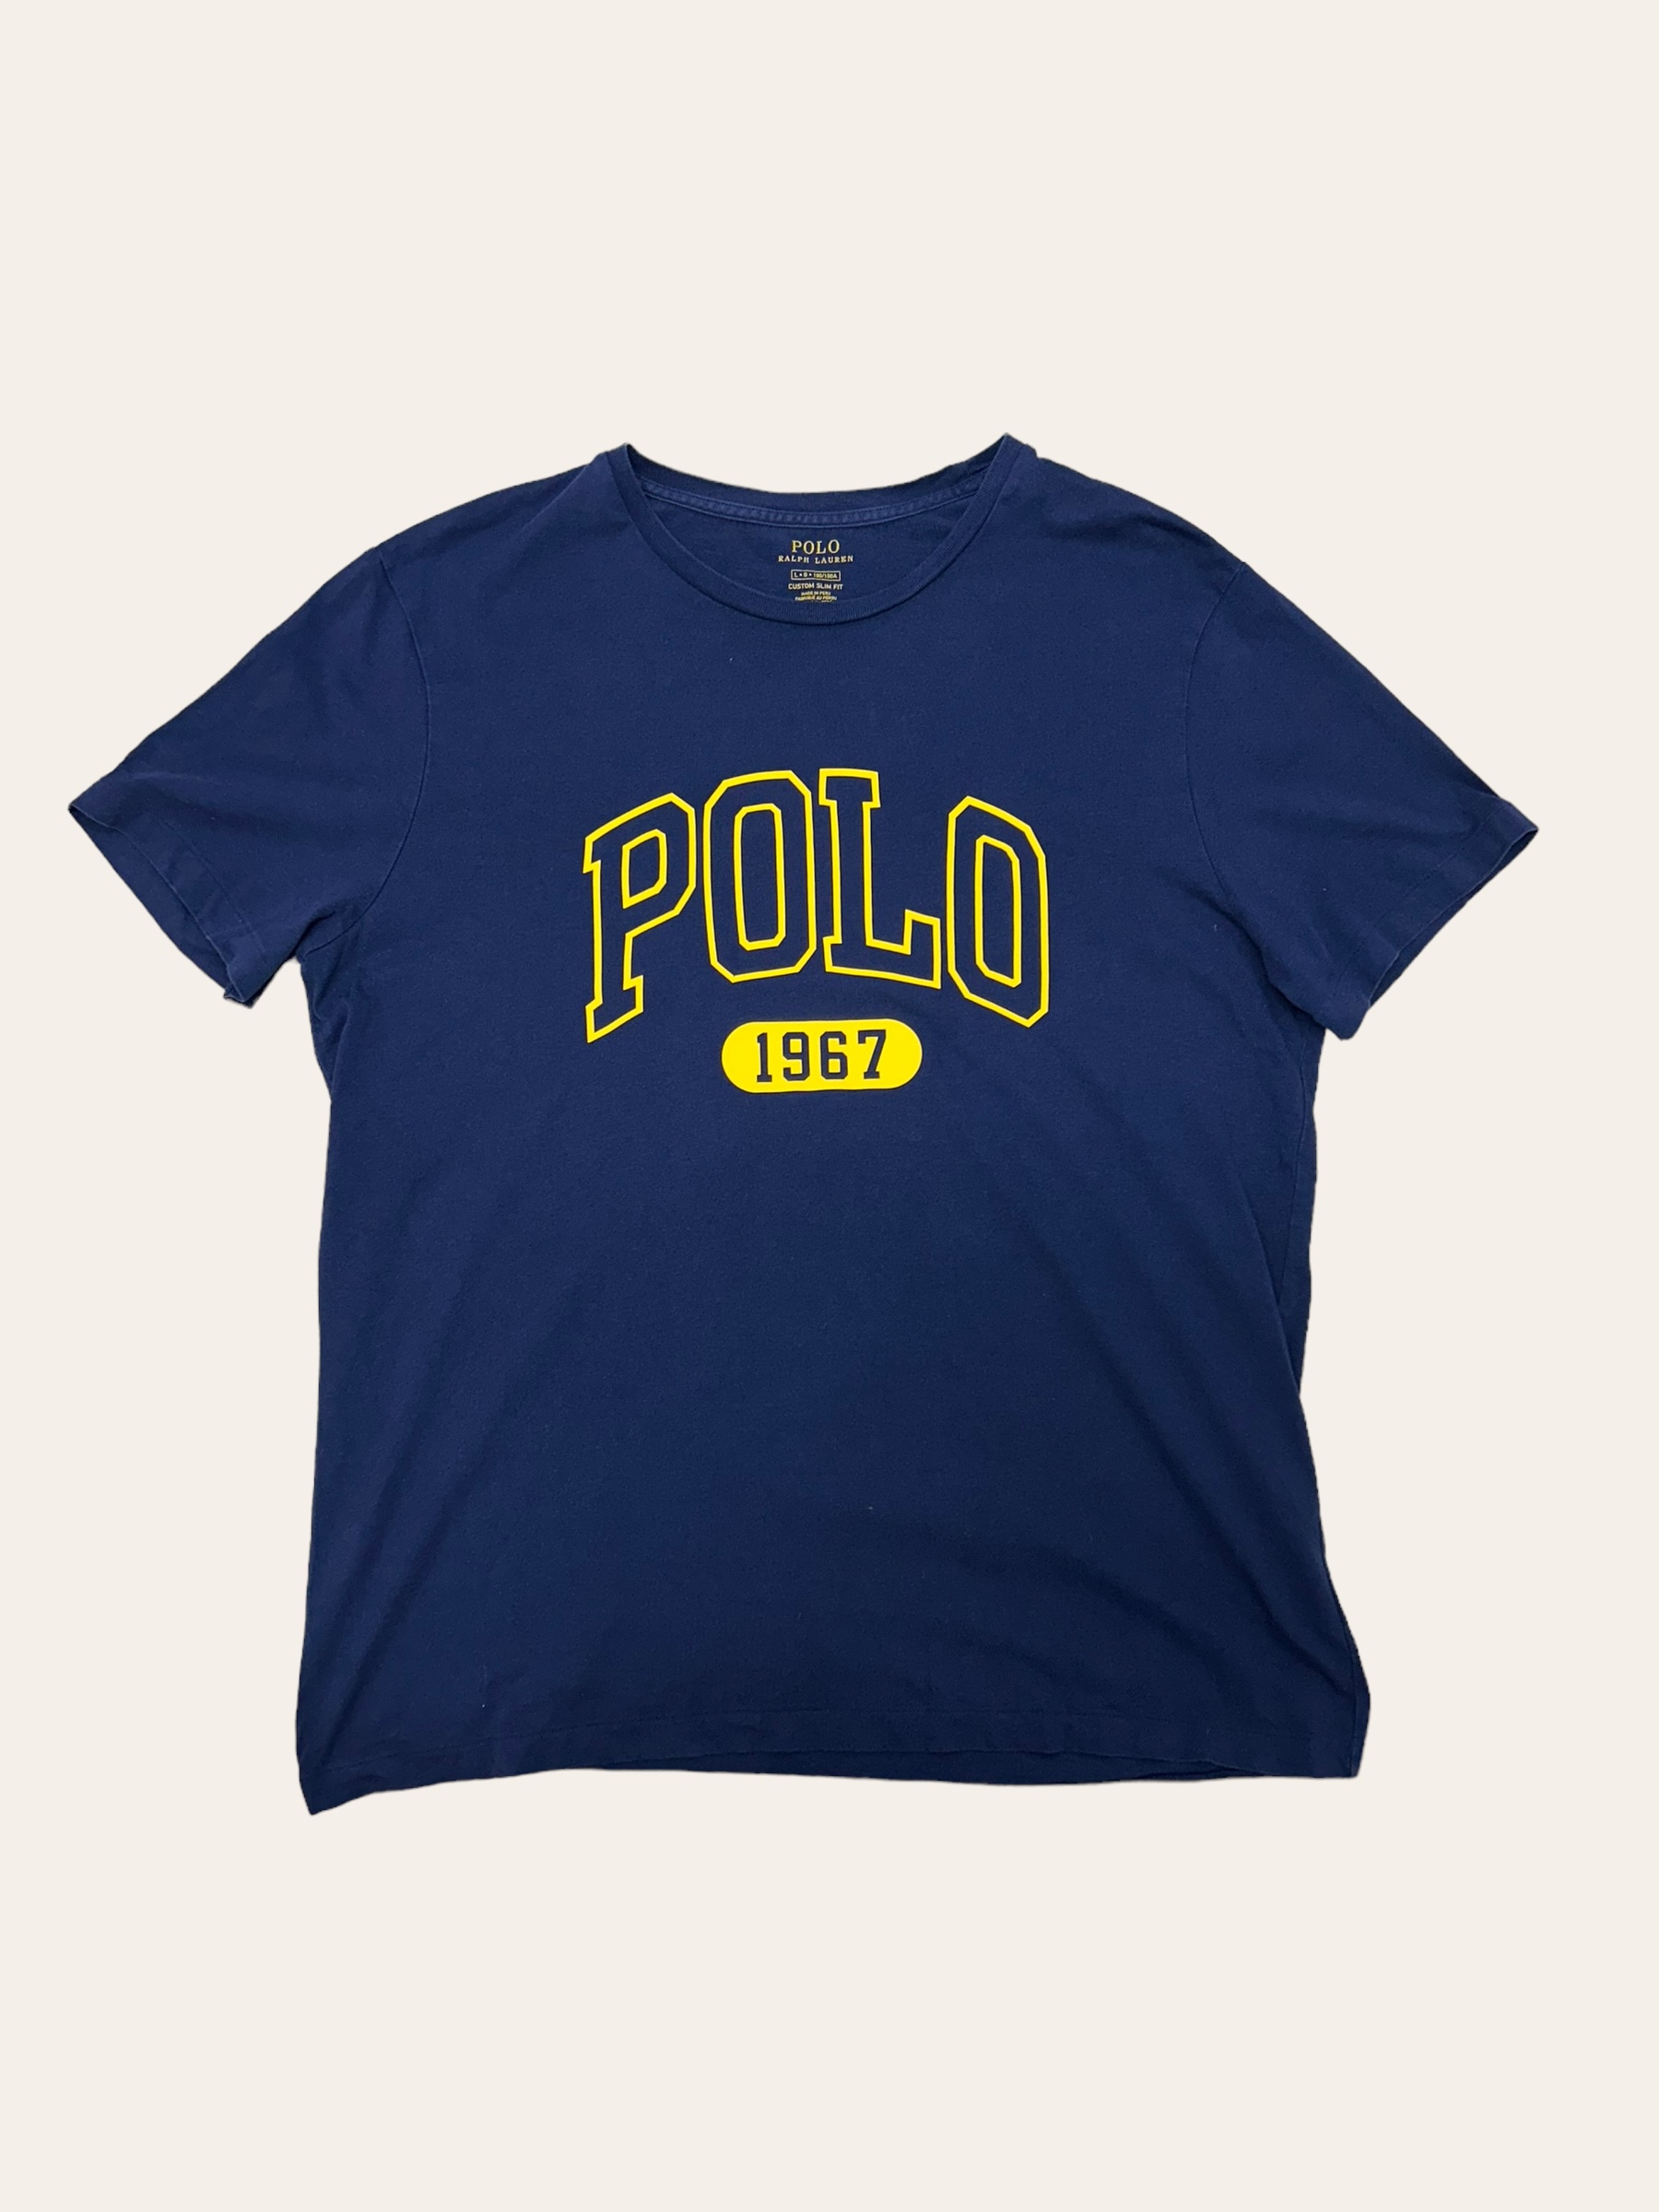 Polo ralph lauren navy spell out printing T-shirt L